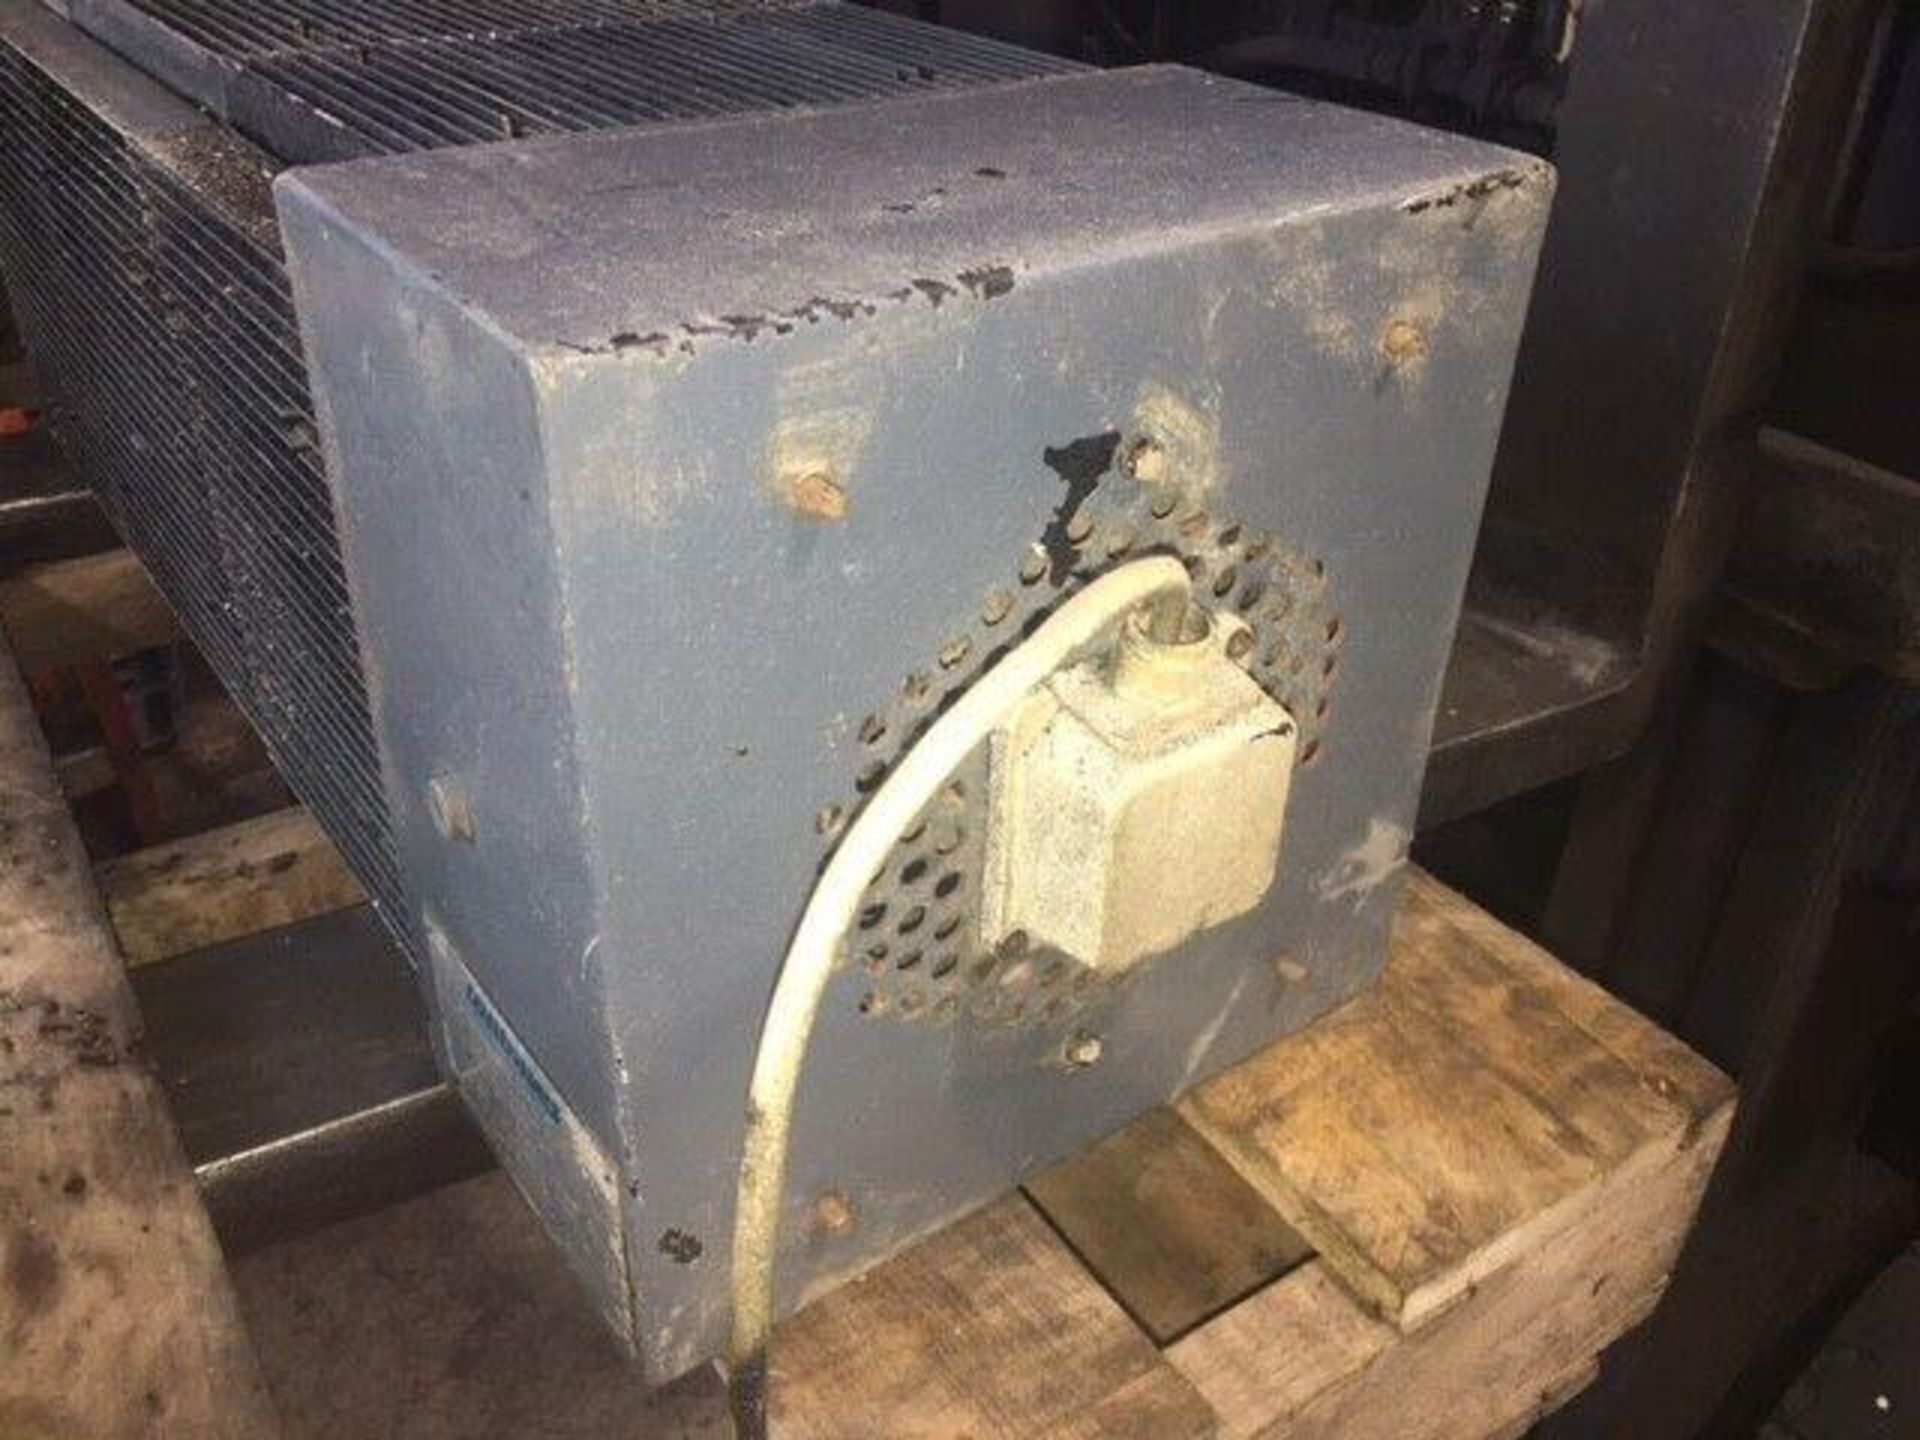 Contraves Spindle Drive Motor, GK100-20BS9, 6/11 kW, 5000 RPM - Image 3 of 5